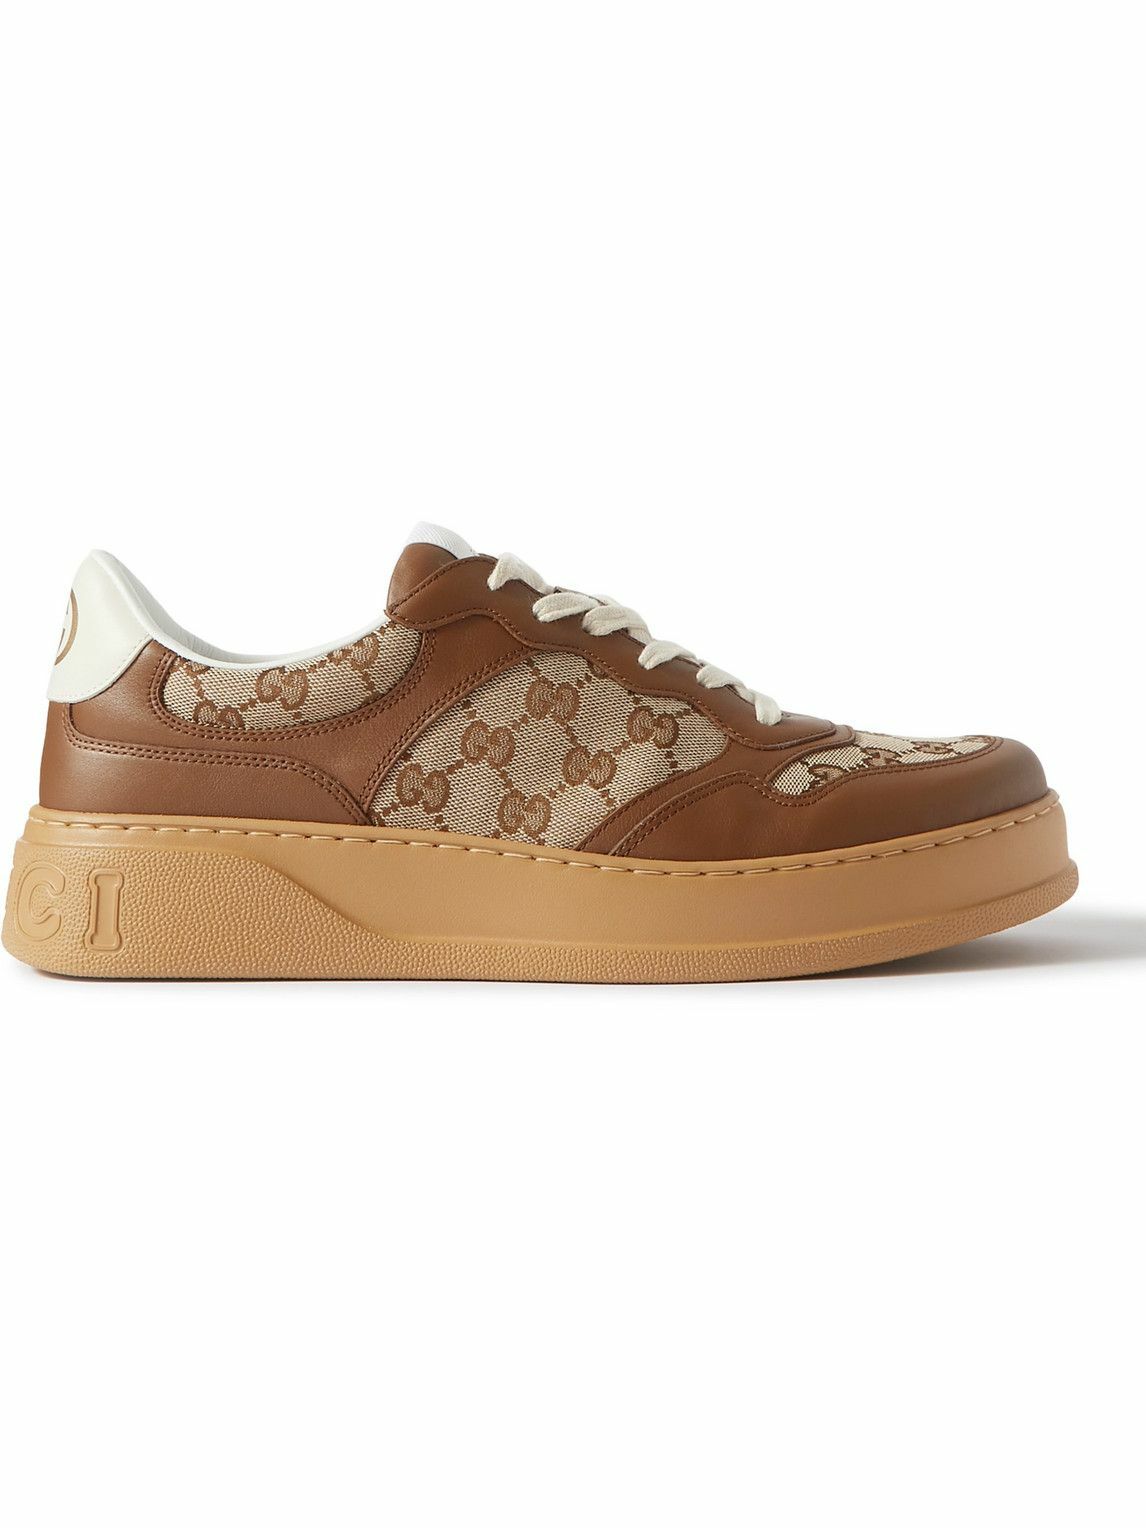 GUCCI - Jive Monogrammed Canvas and Leather Sneakers - Brown Gucci